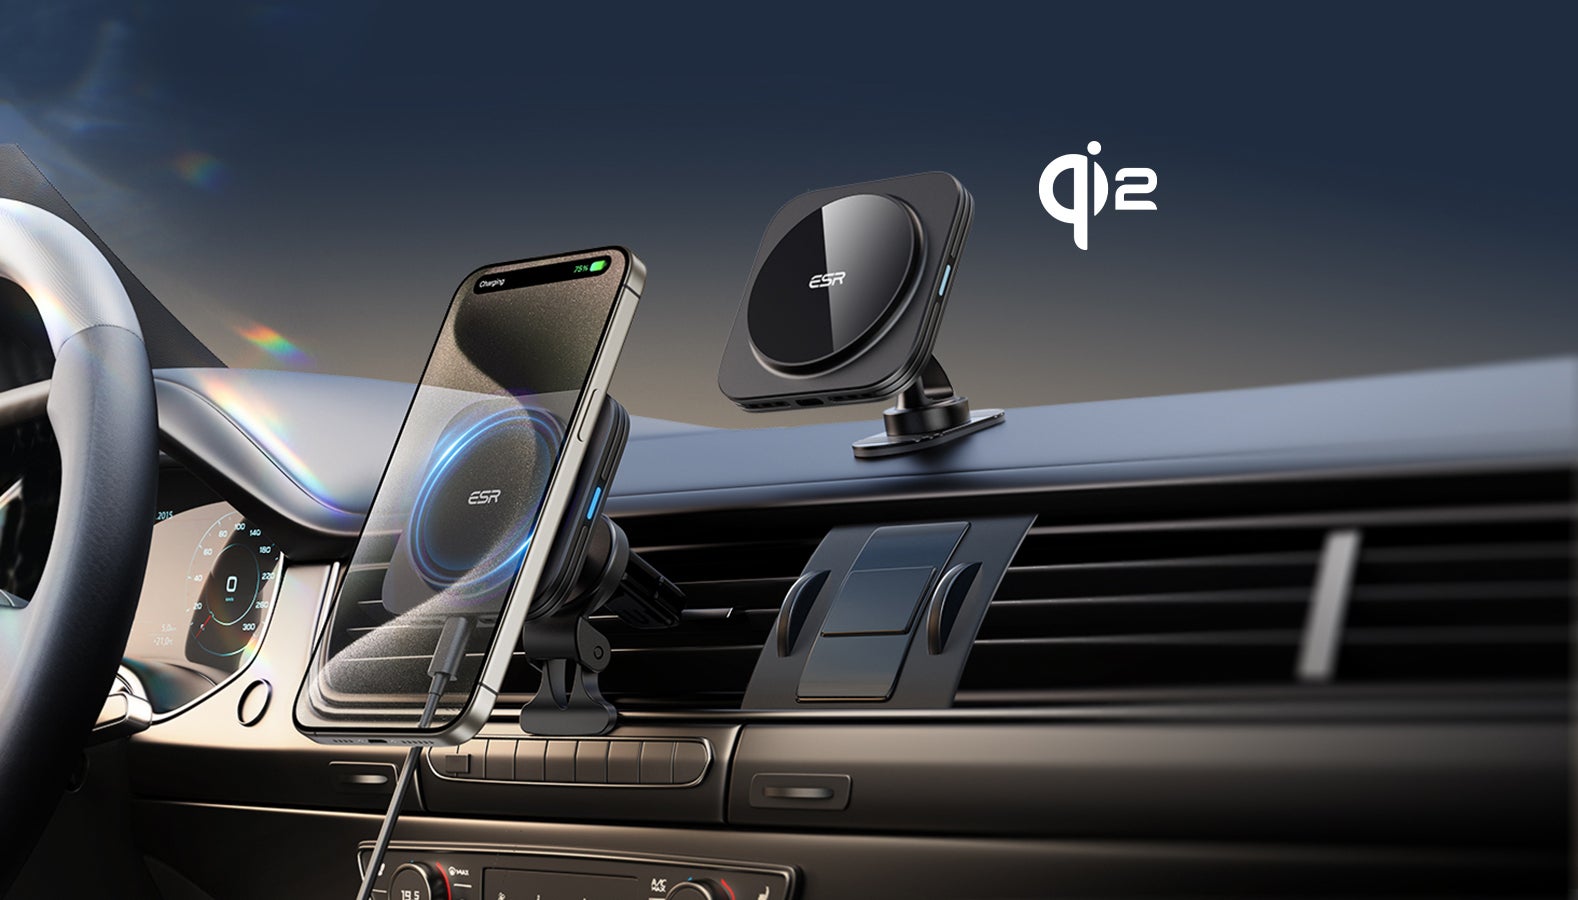 Qi2 is here! Enjoy excellent chargers and mounts from ESR